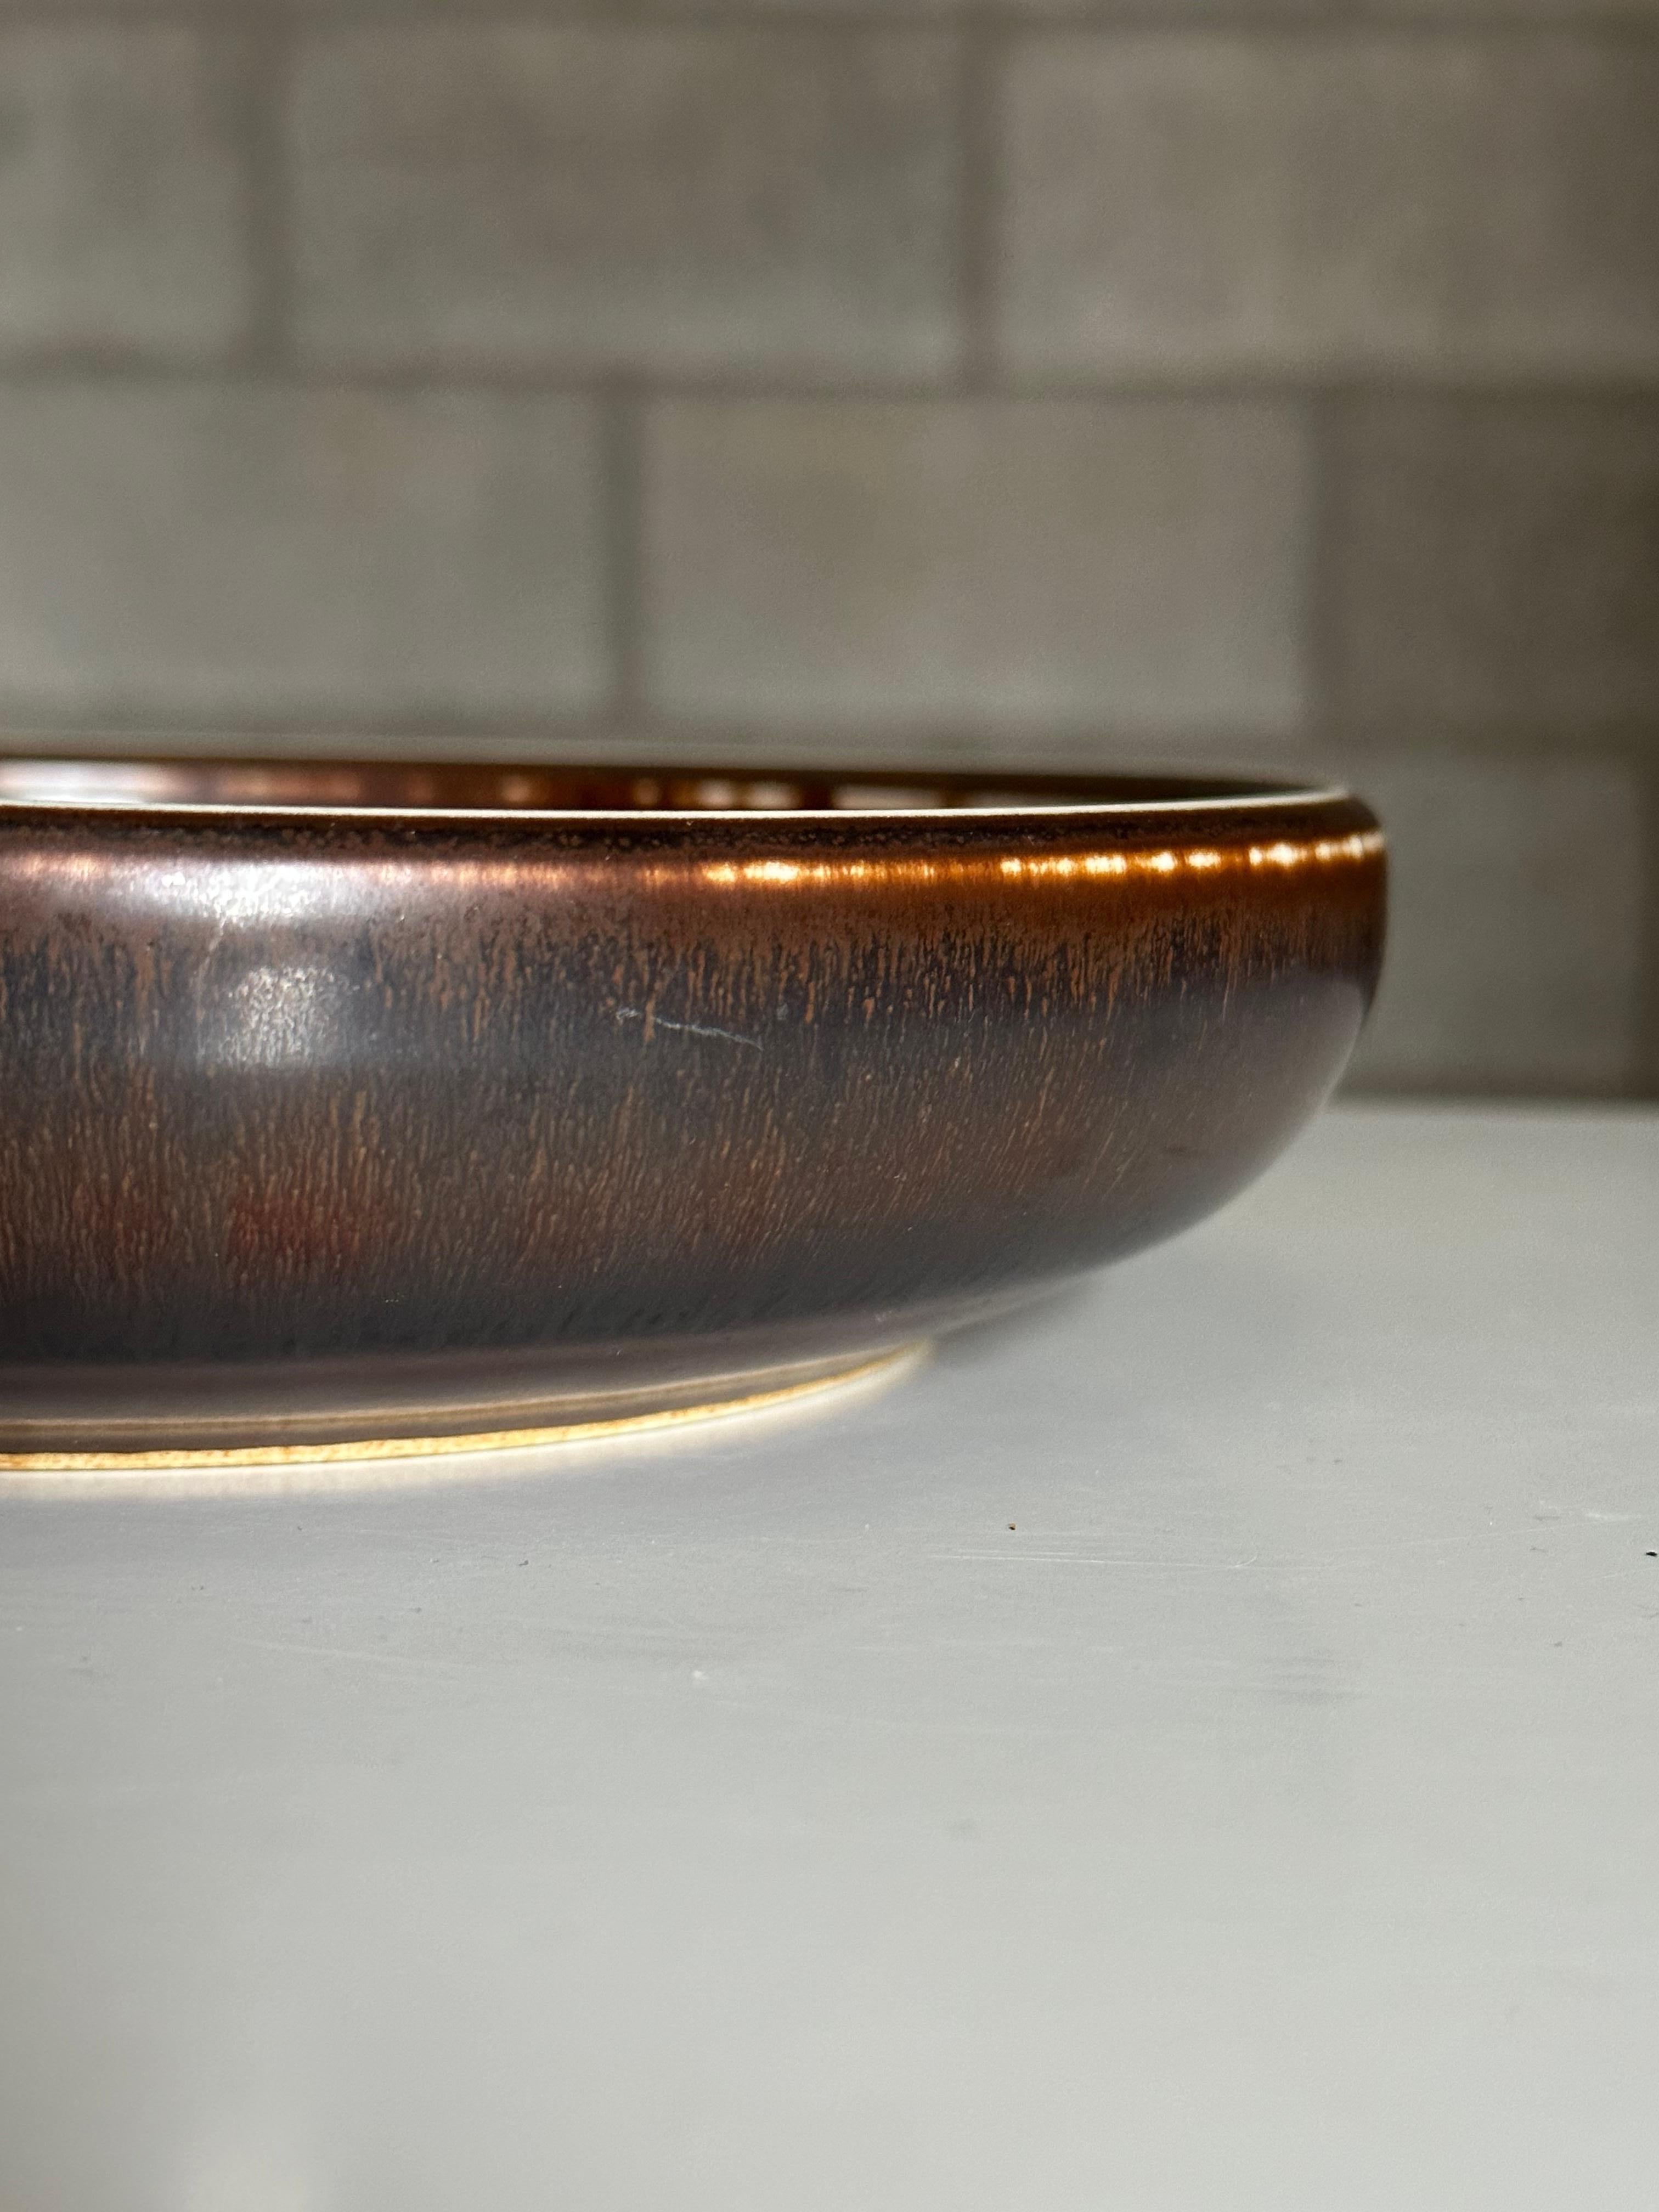 A sizable low bowl designed by Carl Harry Stålhane for Rörstrand. Would work well in a variety of applications including as a small fruit bowl, as a catchall, ashtray, etc. Really nice colors and scale, gives it a good presence.